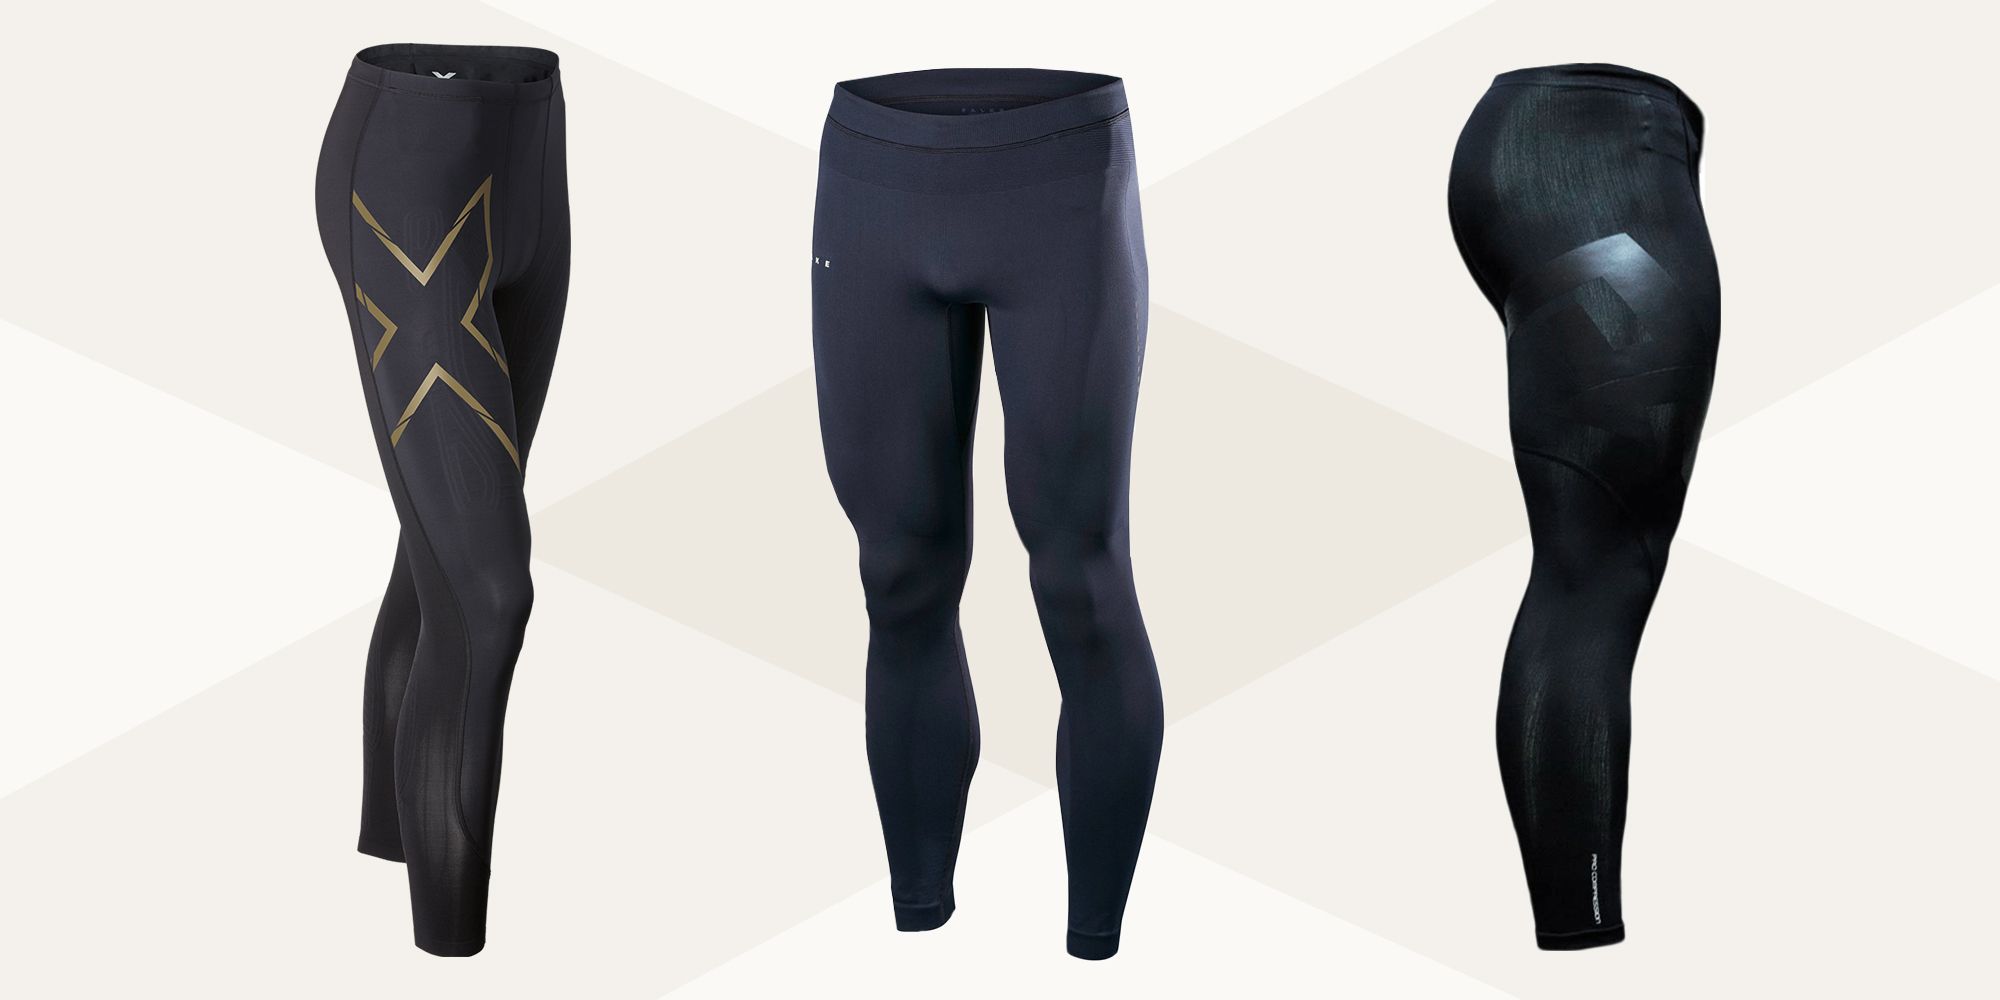 Yaal COMPRESSION TIGHTS PANT WITH SILVER STICHES Men Compression Price in  India - Buy Yaal COMPRESSION TIGHTS PANT WITH SILVER STICHES Men Compression  online at Flipkart.com